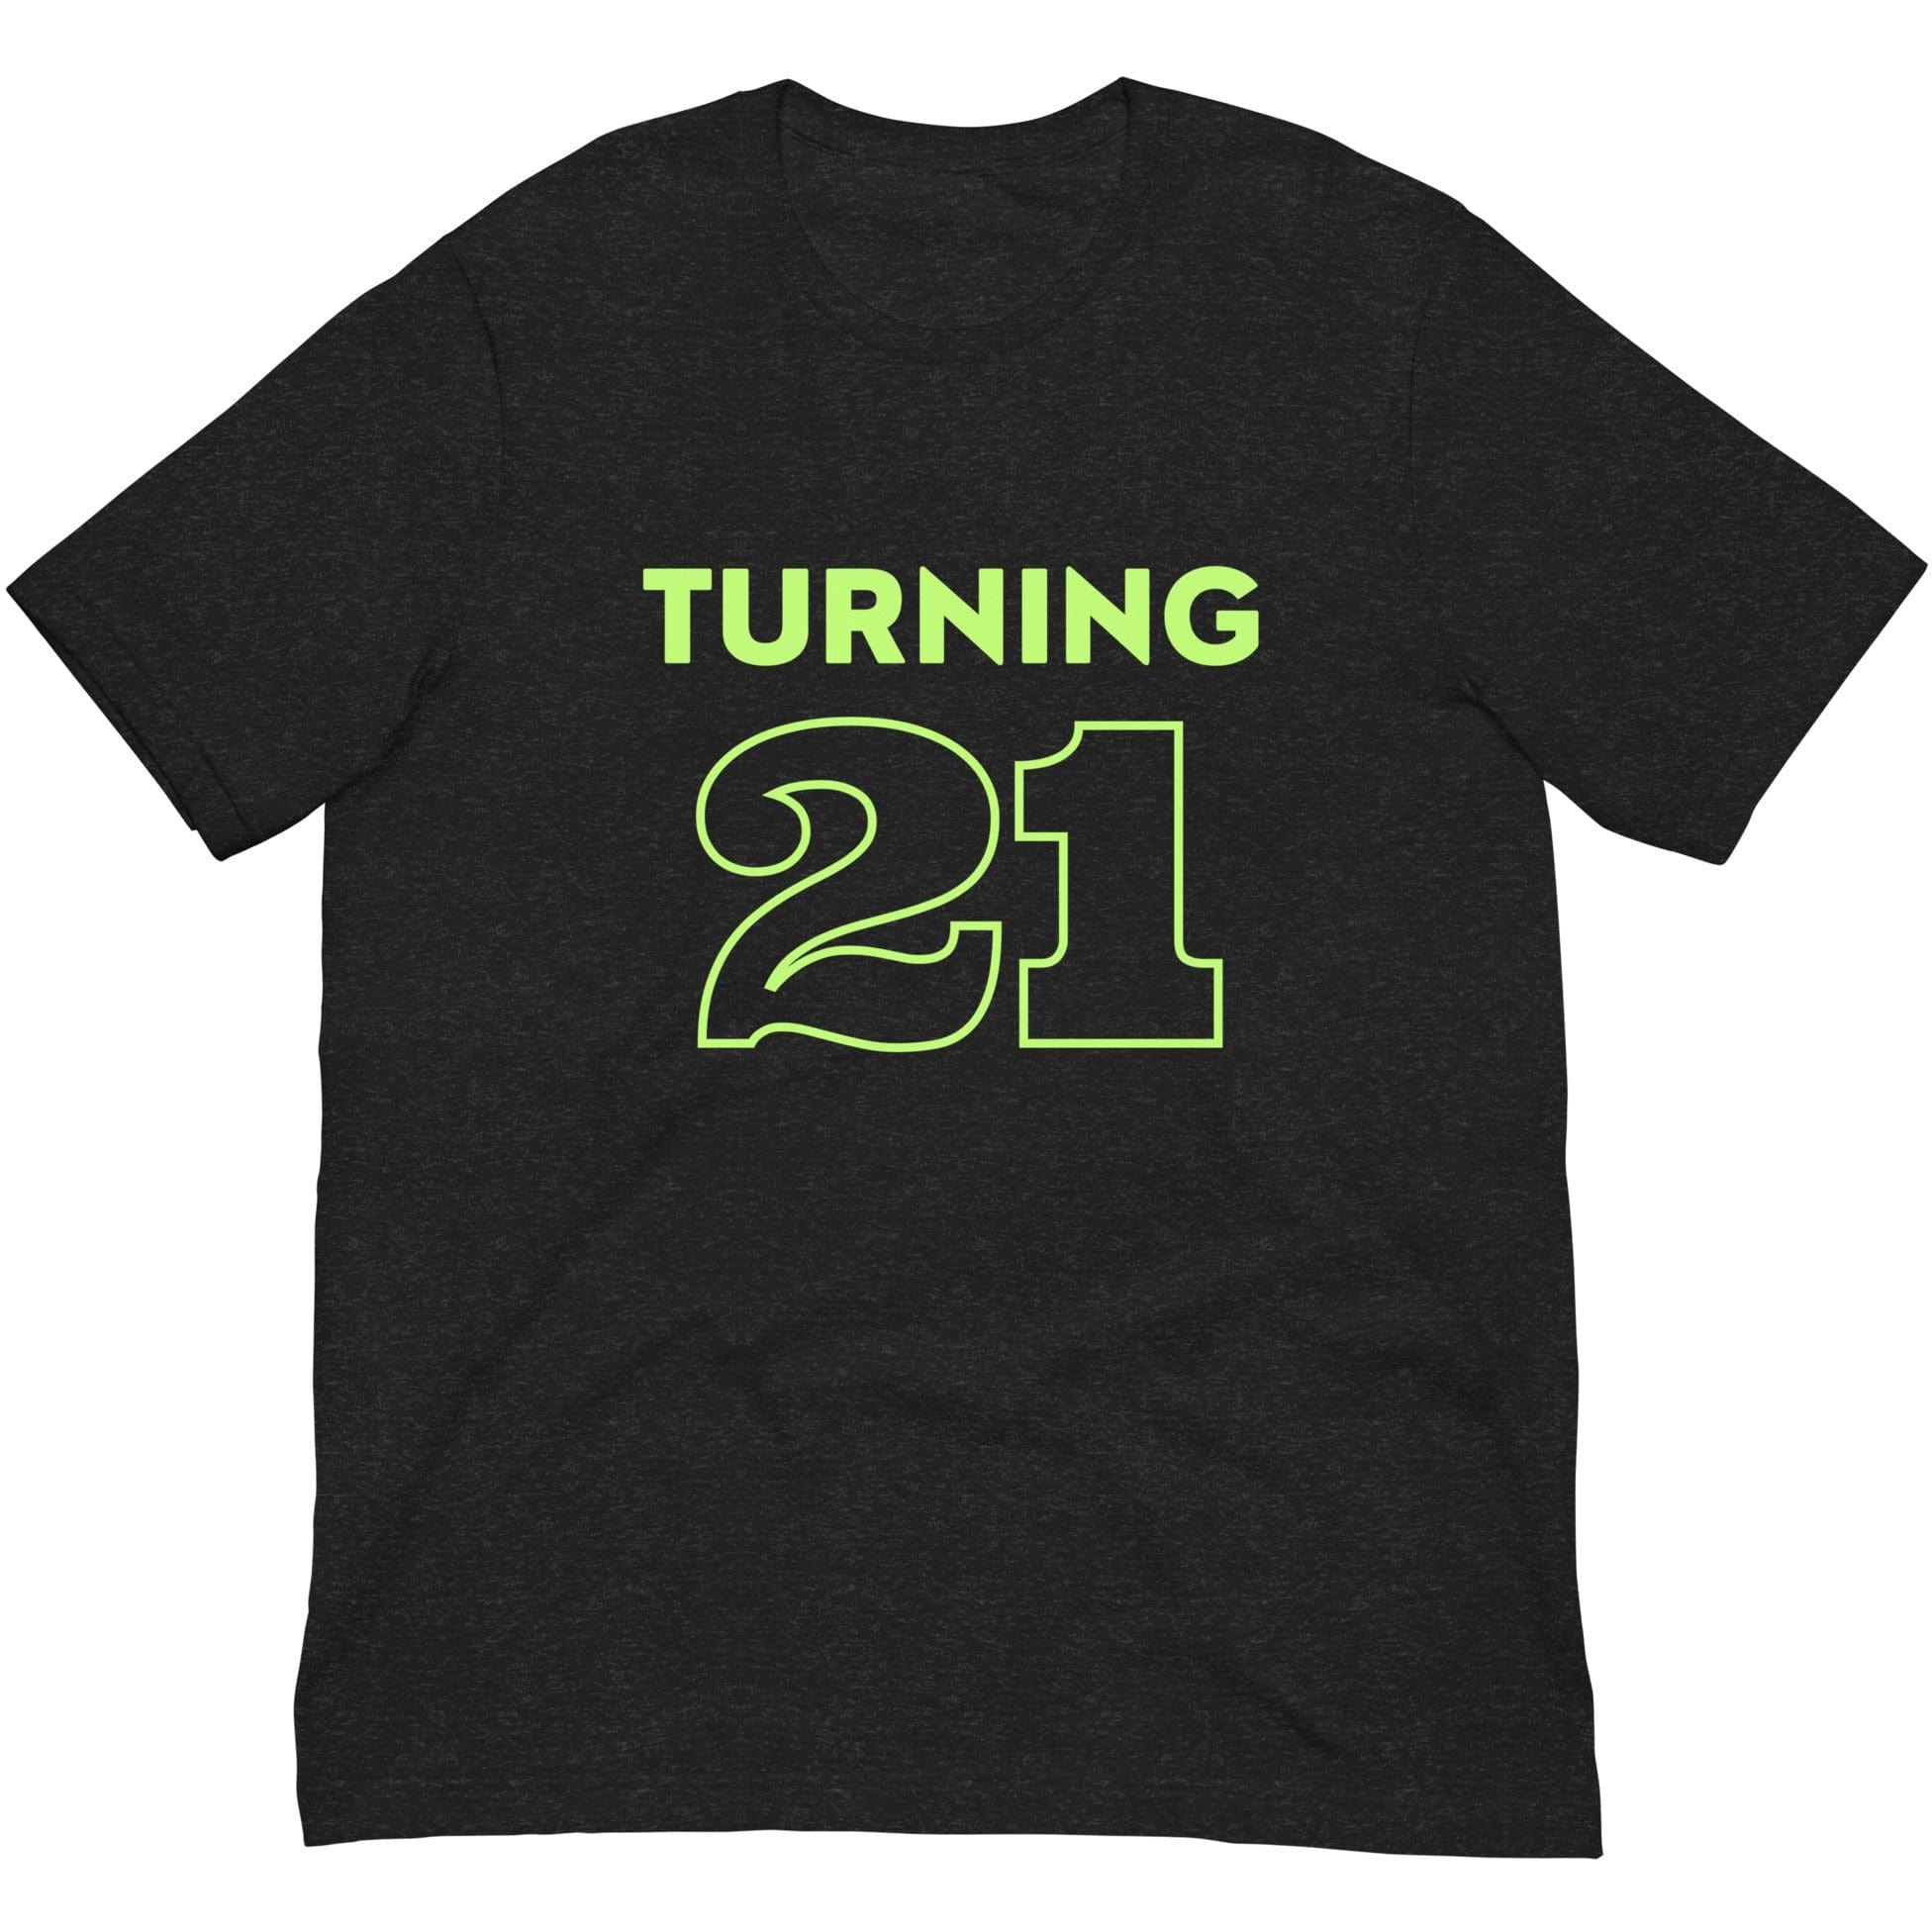 Ultimate Party Super Stores Black Heather / XS TURNING 21! Unisex t-shirt